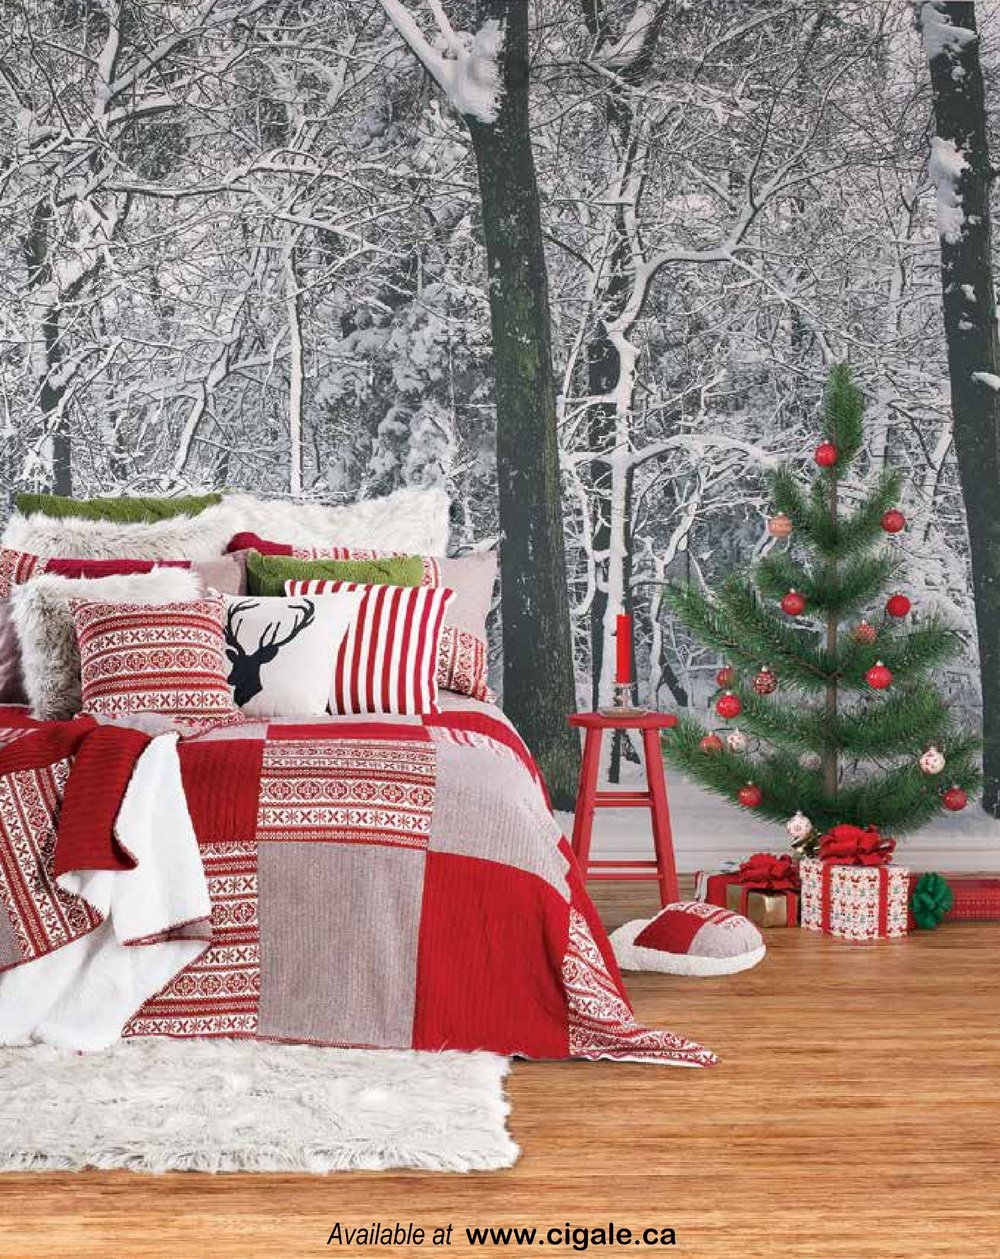 Jingle Bells Bedding collection from Brunelli